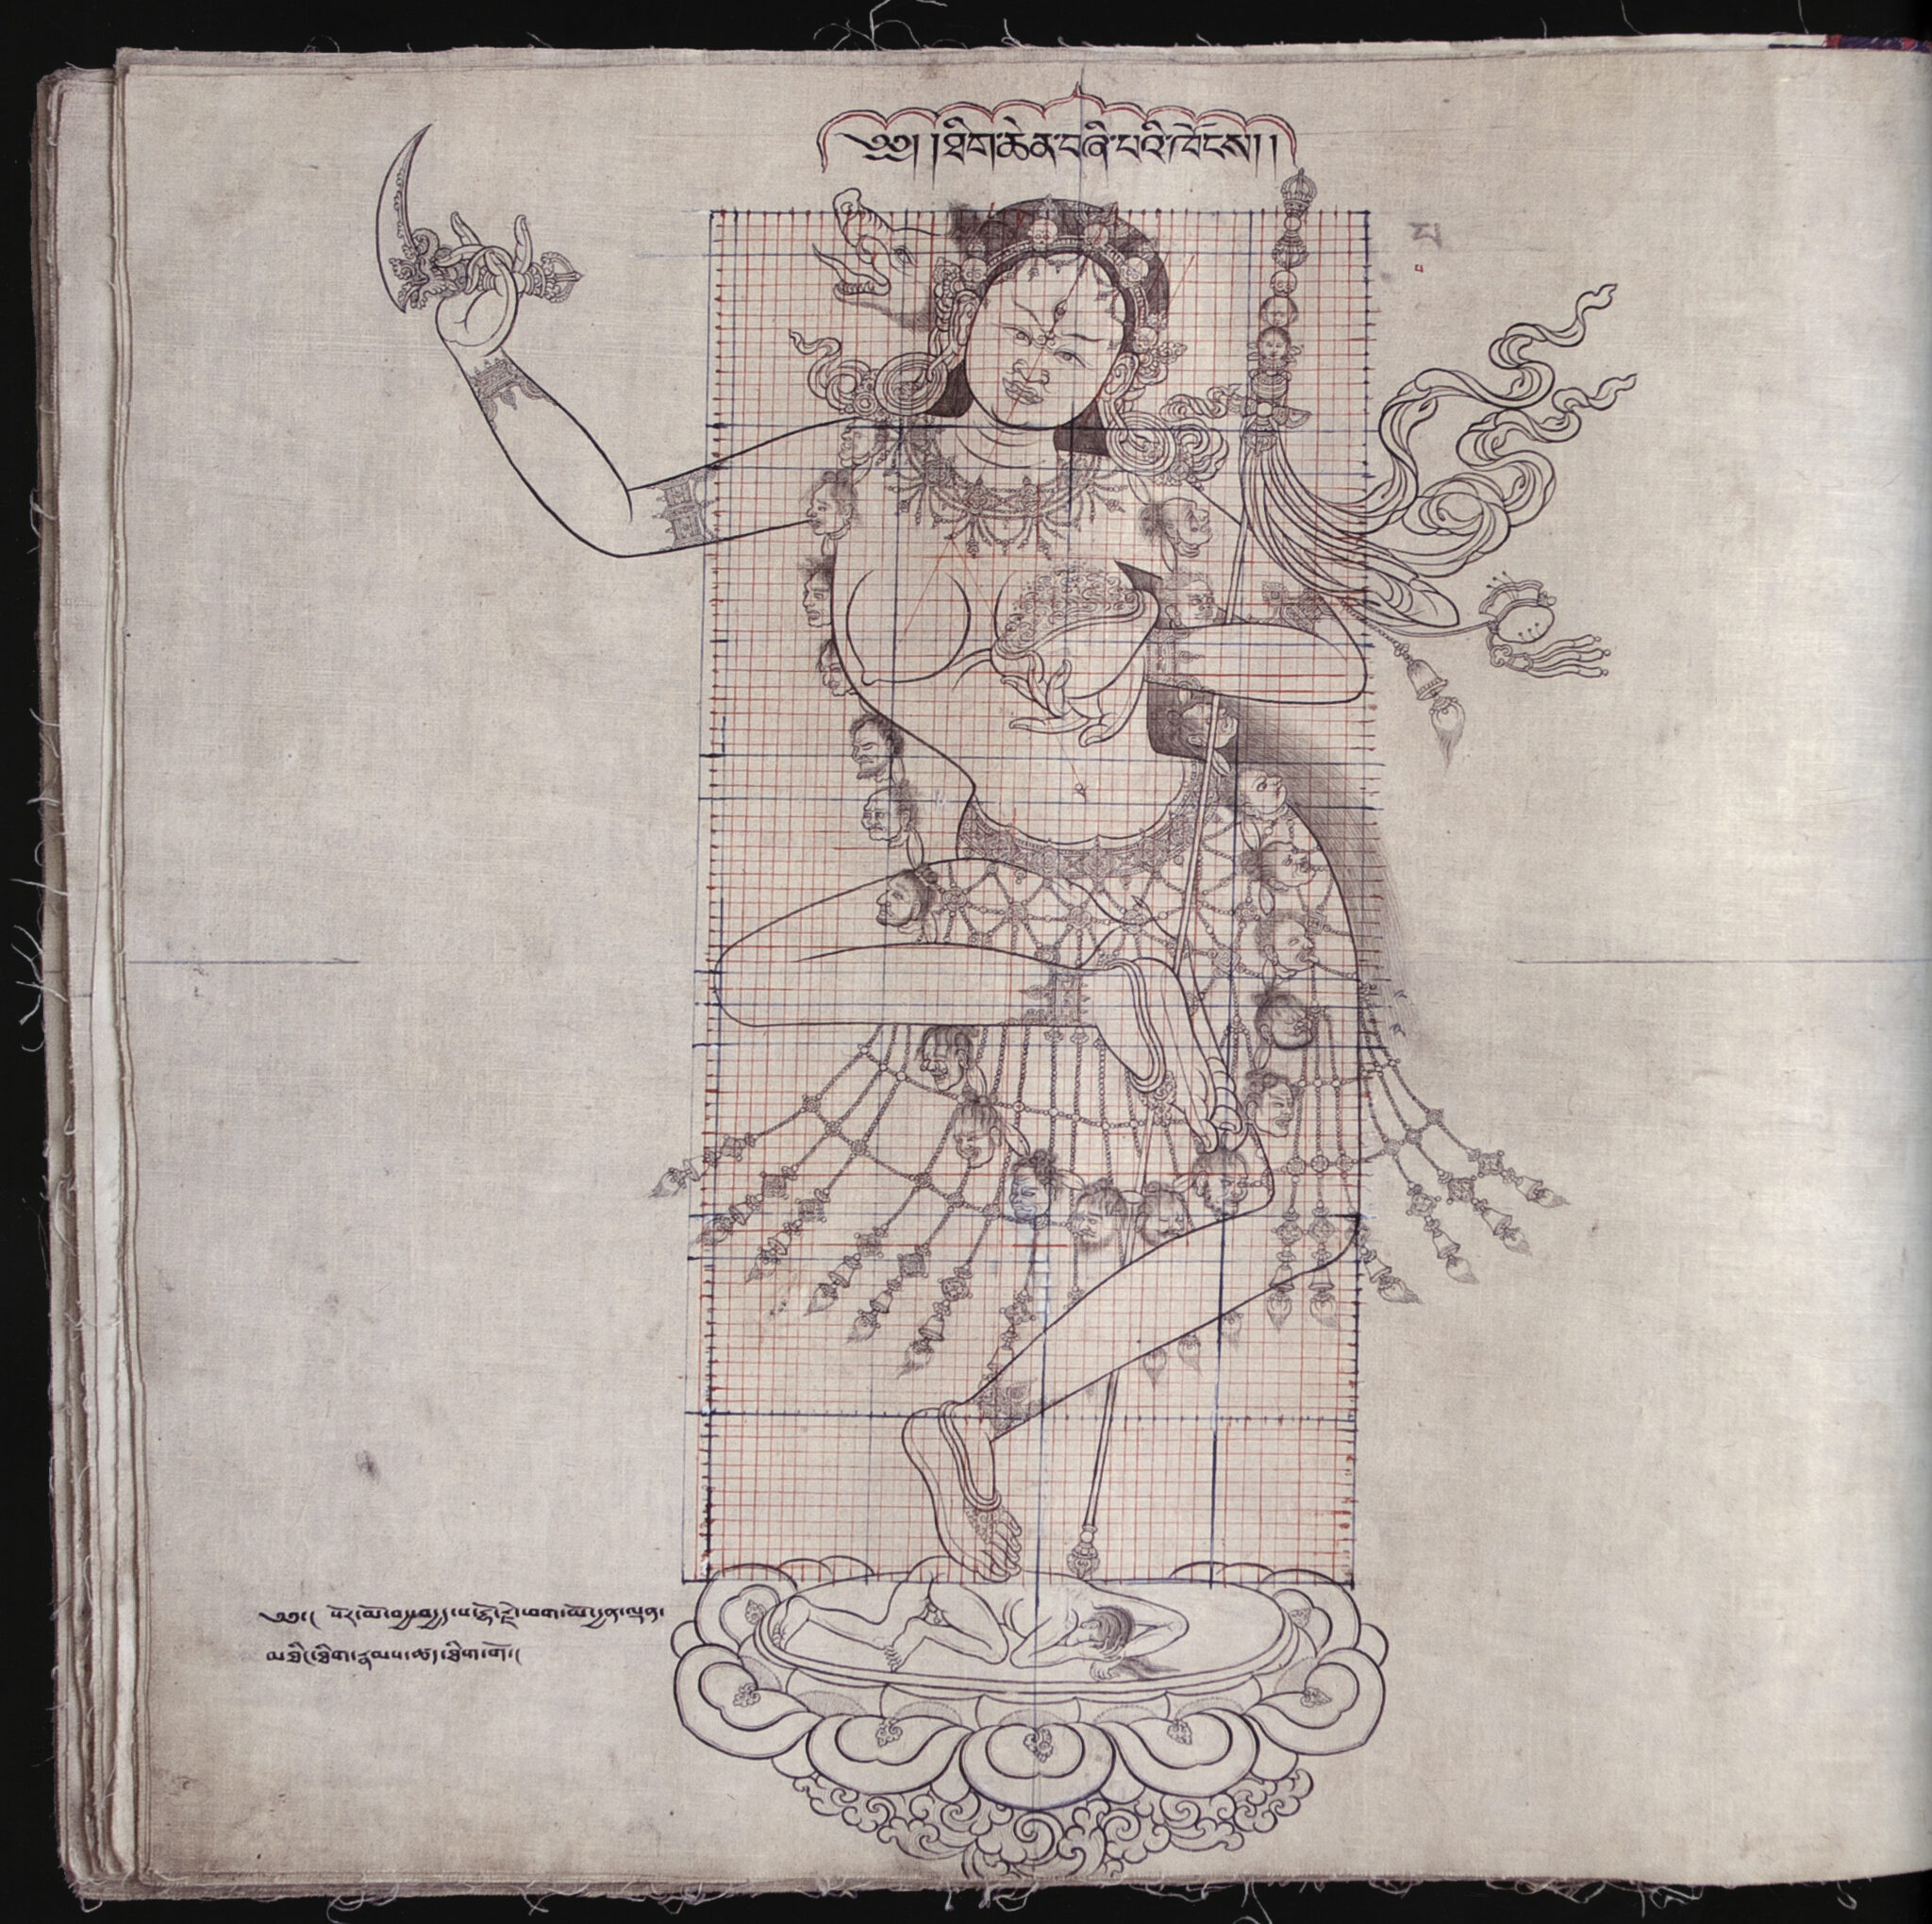 Line drawing depicting female deity dancing atop supine figure overlaid with red rectangular grid pattern